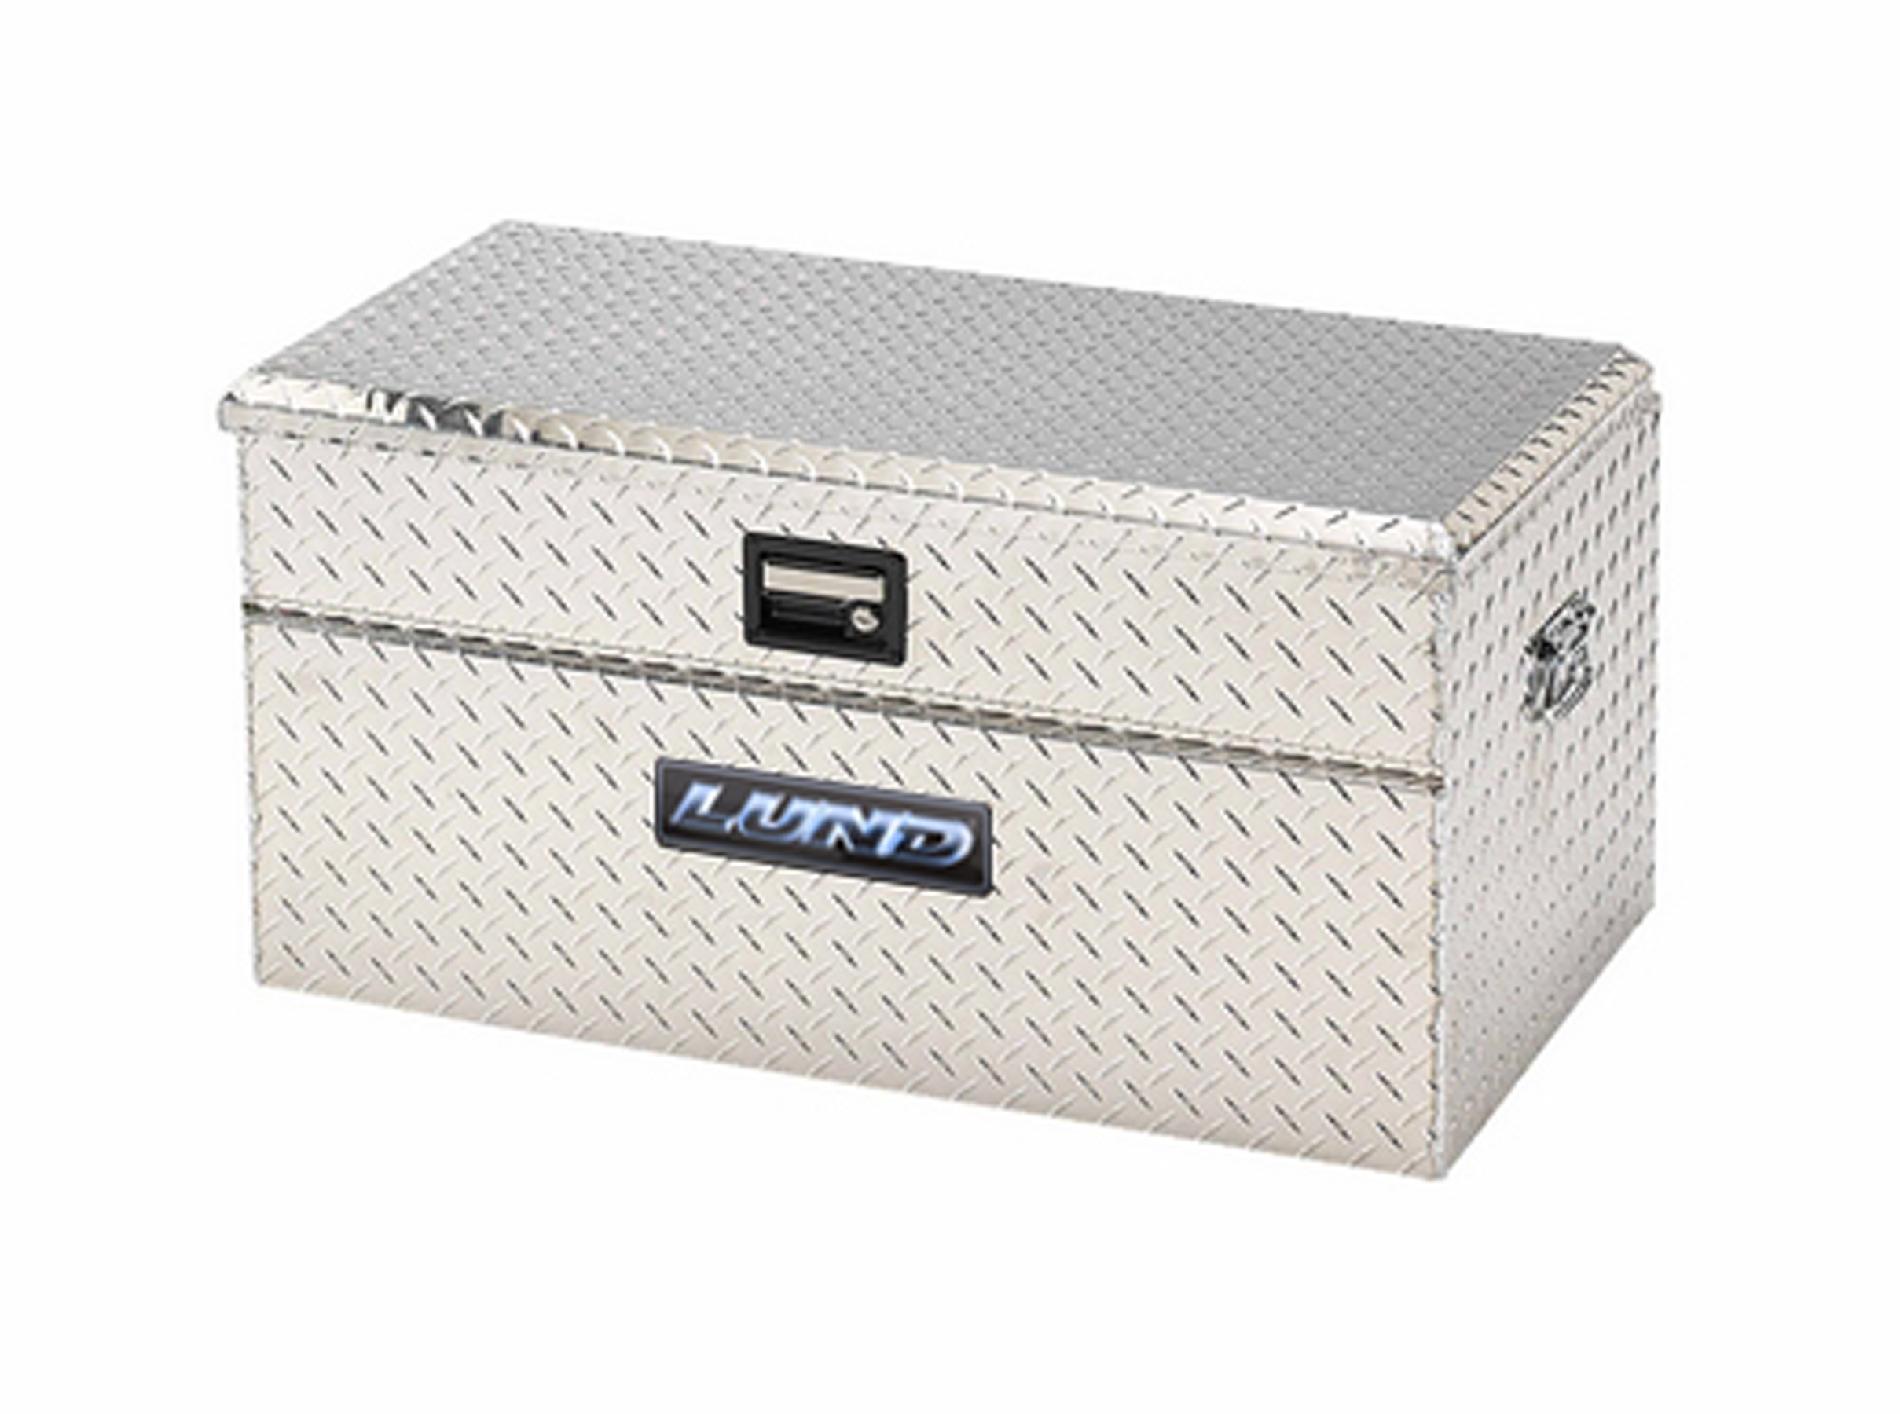 Lund 54-Inch Hitch Cargo Carrier Chest with Handles, Aluminum, Diamond Plate, Brite